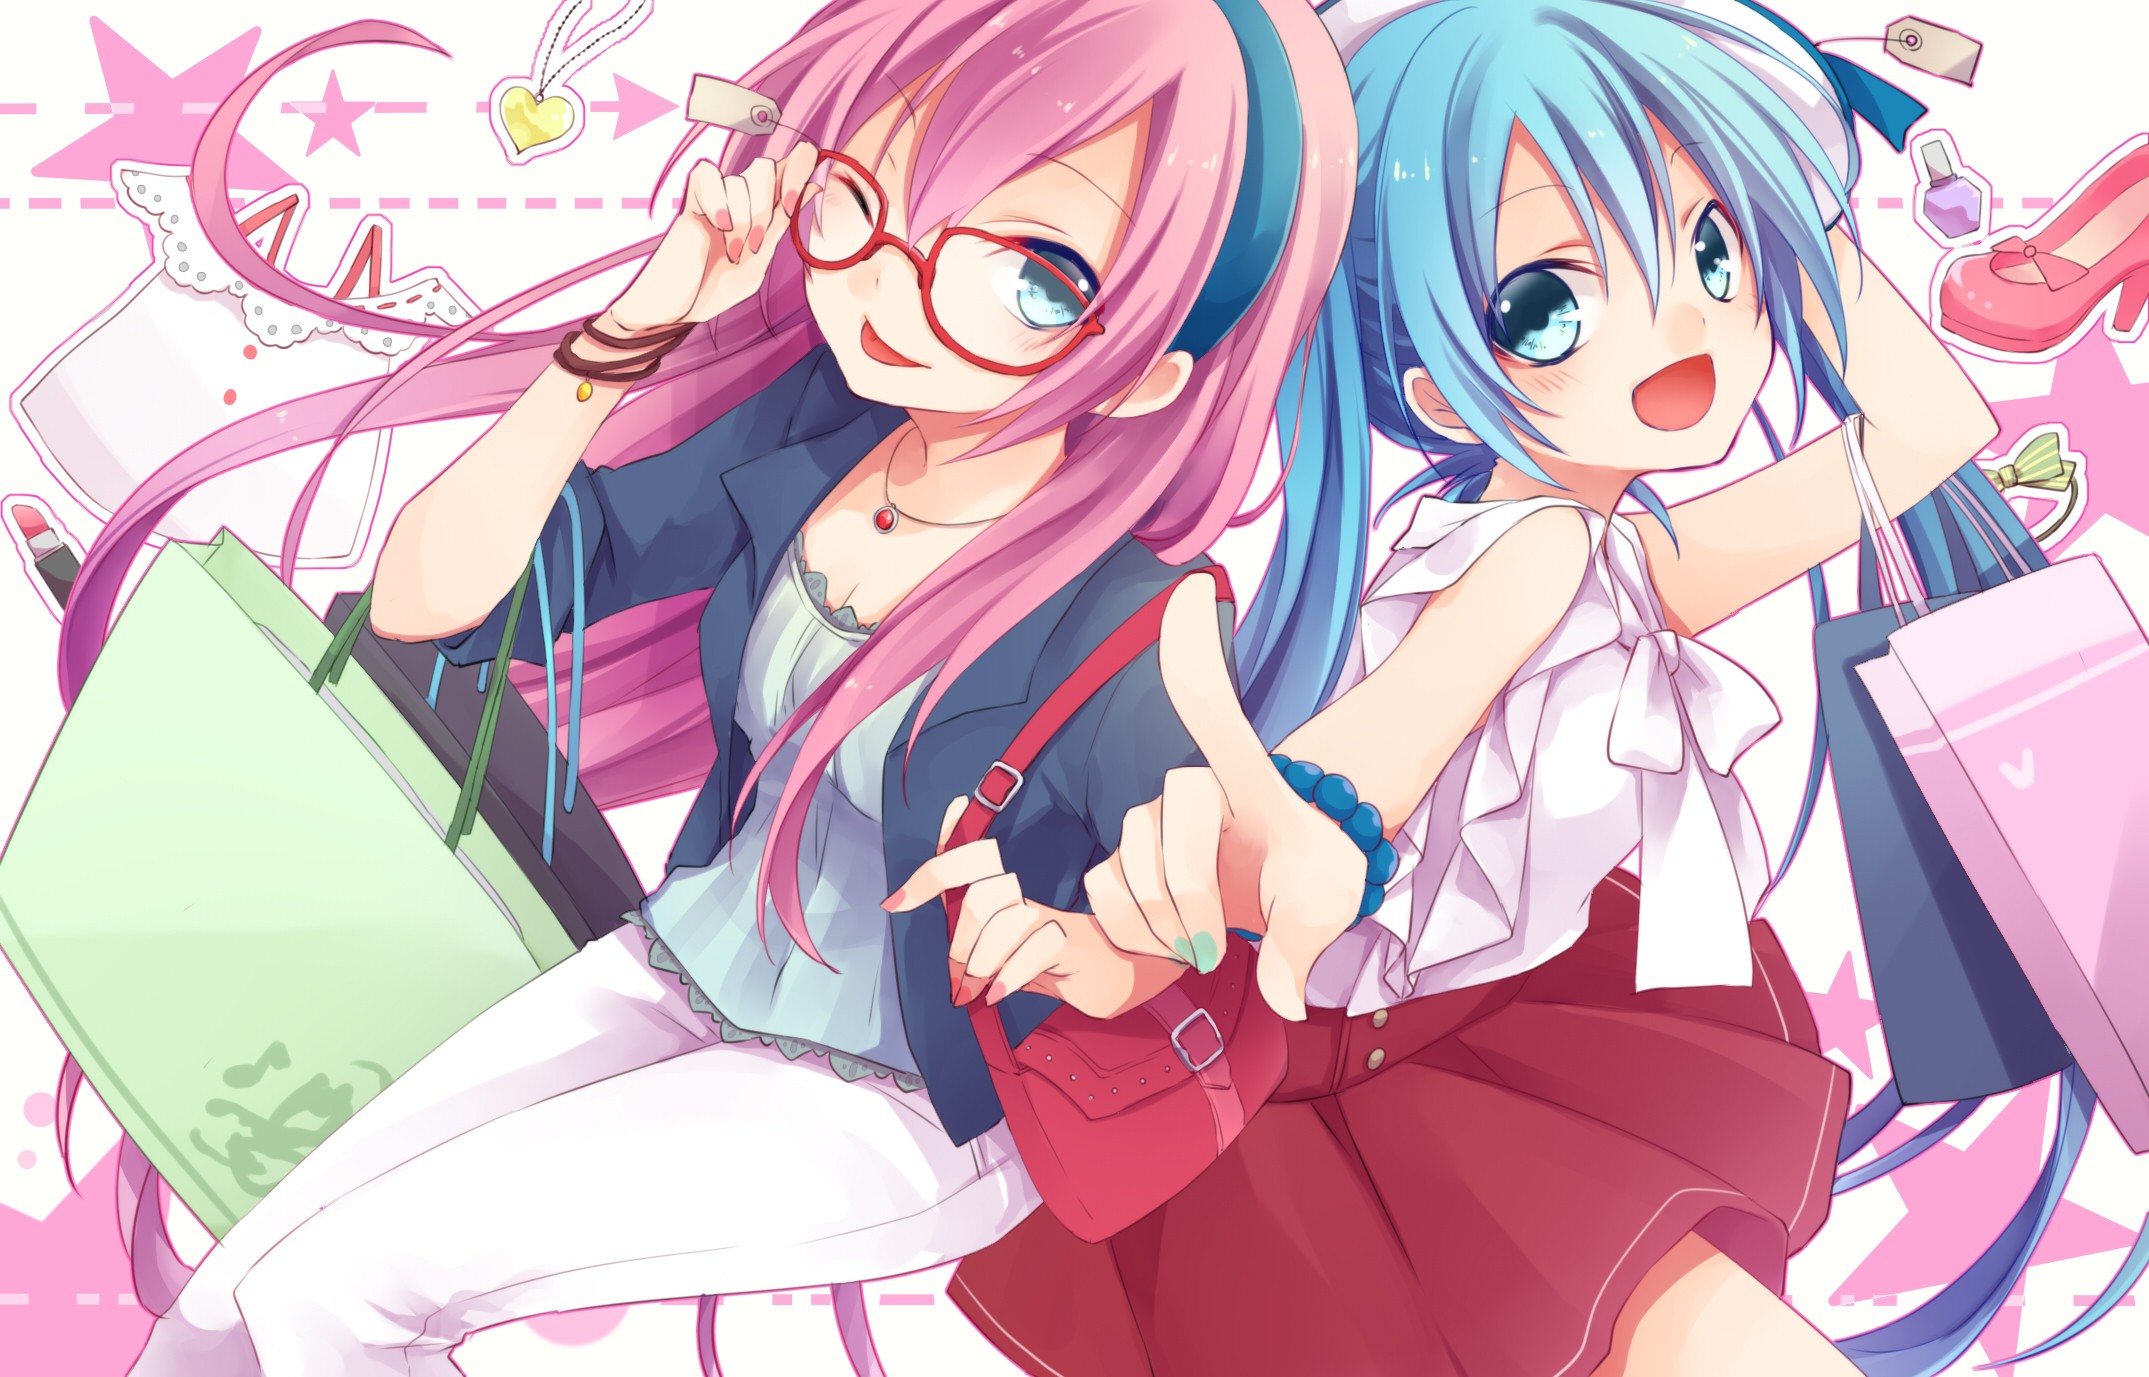 Anime 2149x1377 anime anime girls Vocaloid Hatsune Miku Megurine Luka pink hair two women aqua eyes cyan hair tongues tongue out looking at viewer long hair open mouth hand gesture bracelets